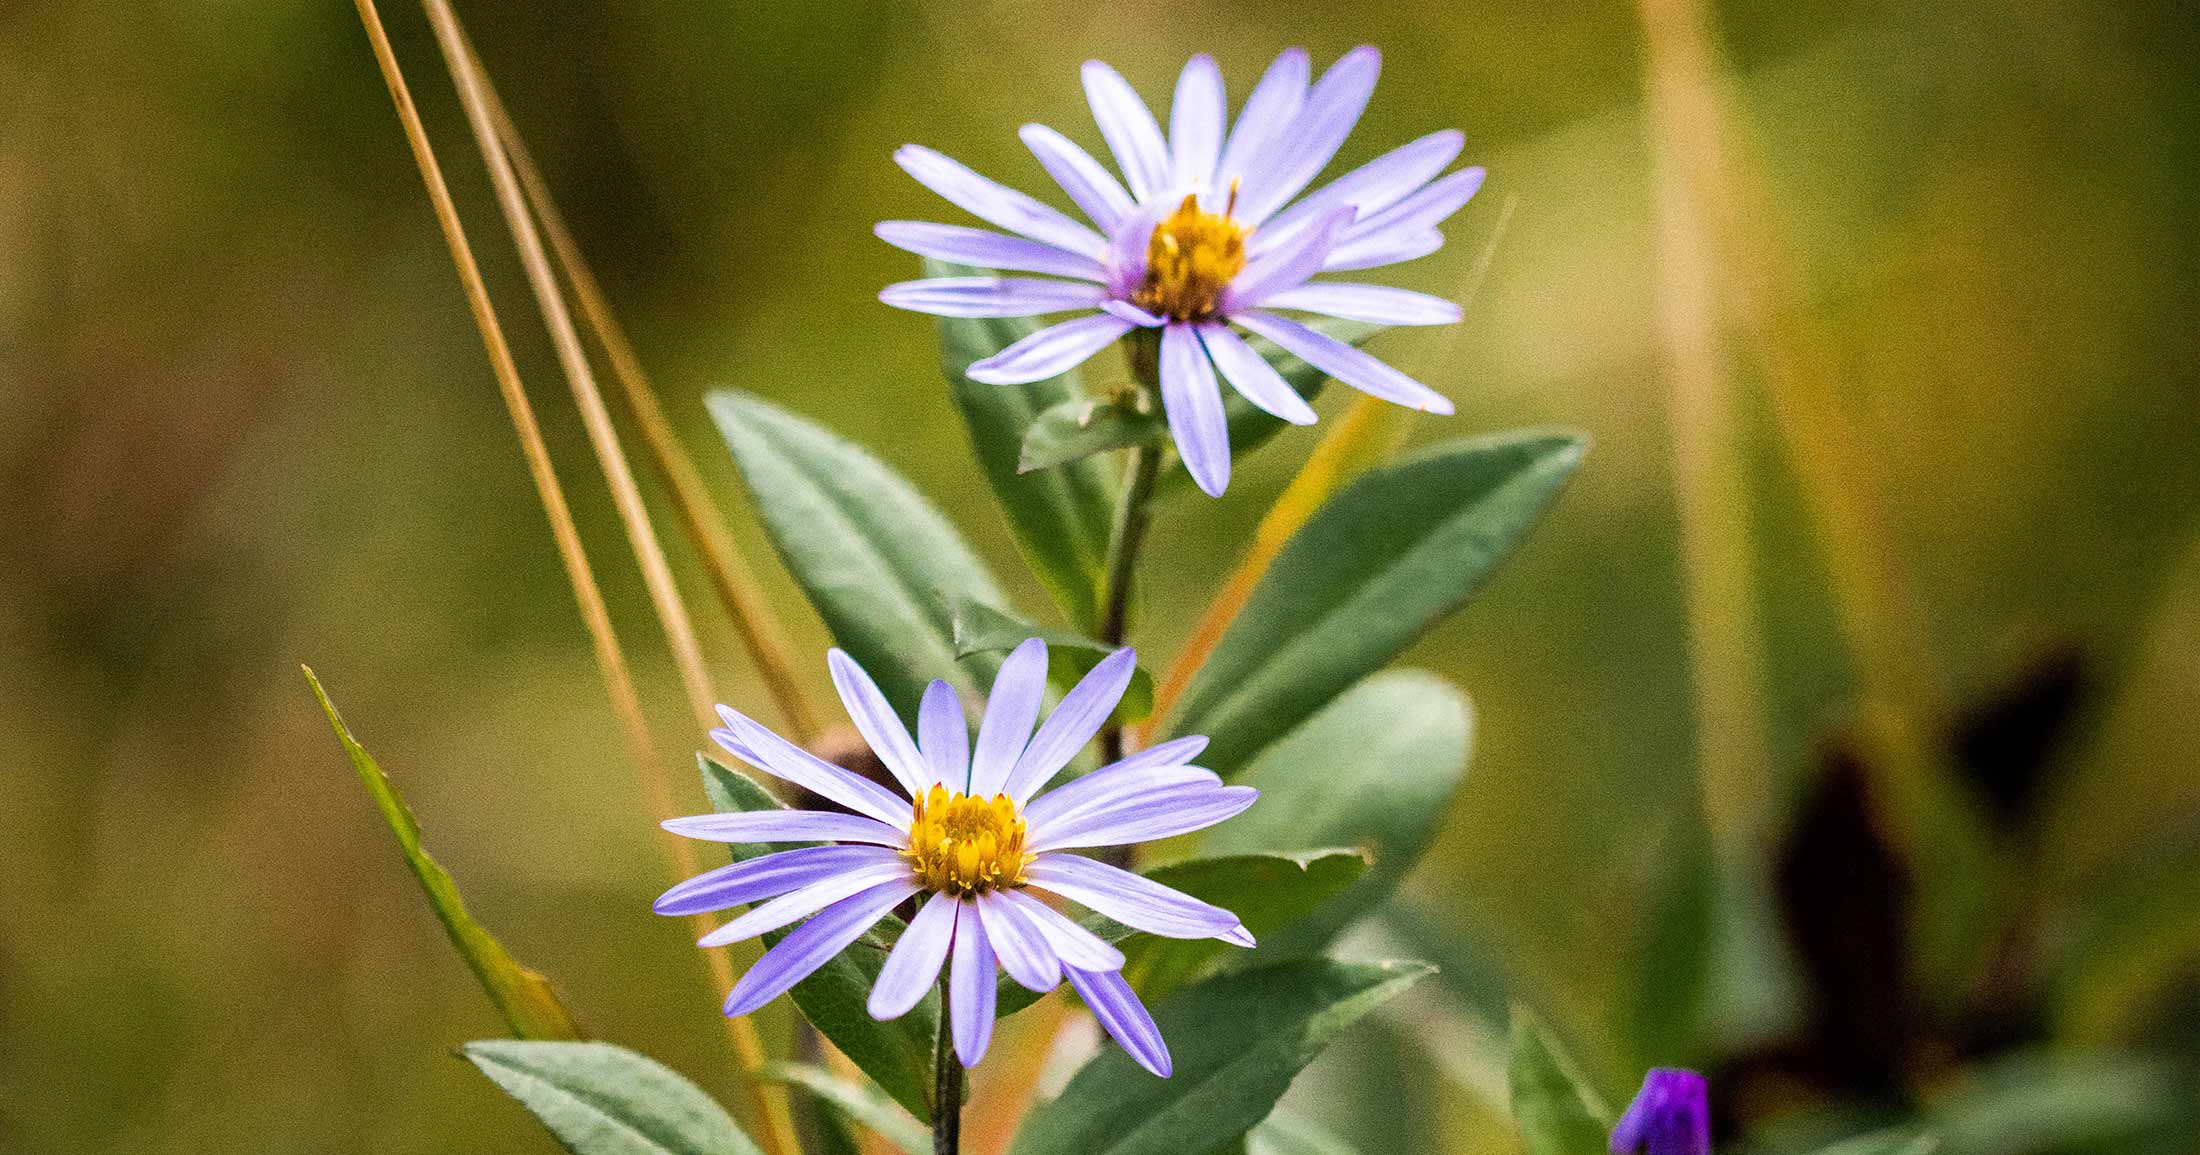 Douglas aster - a purple flower with green leaves.